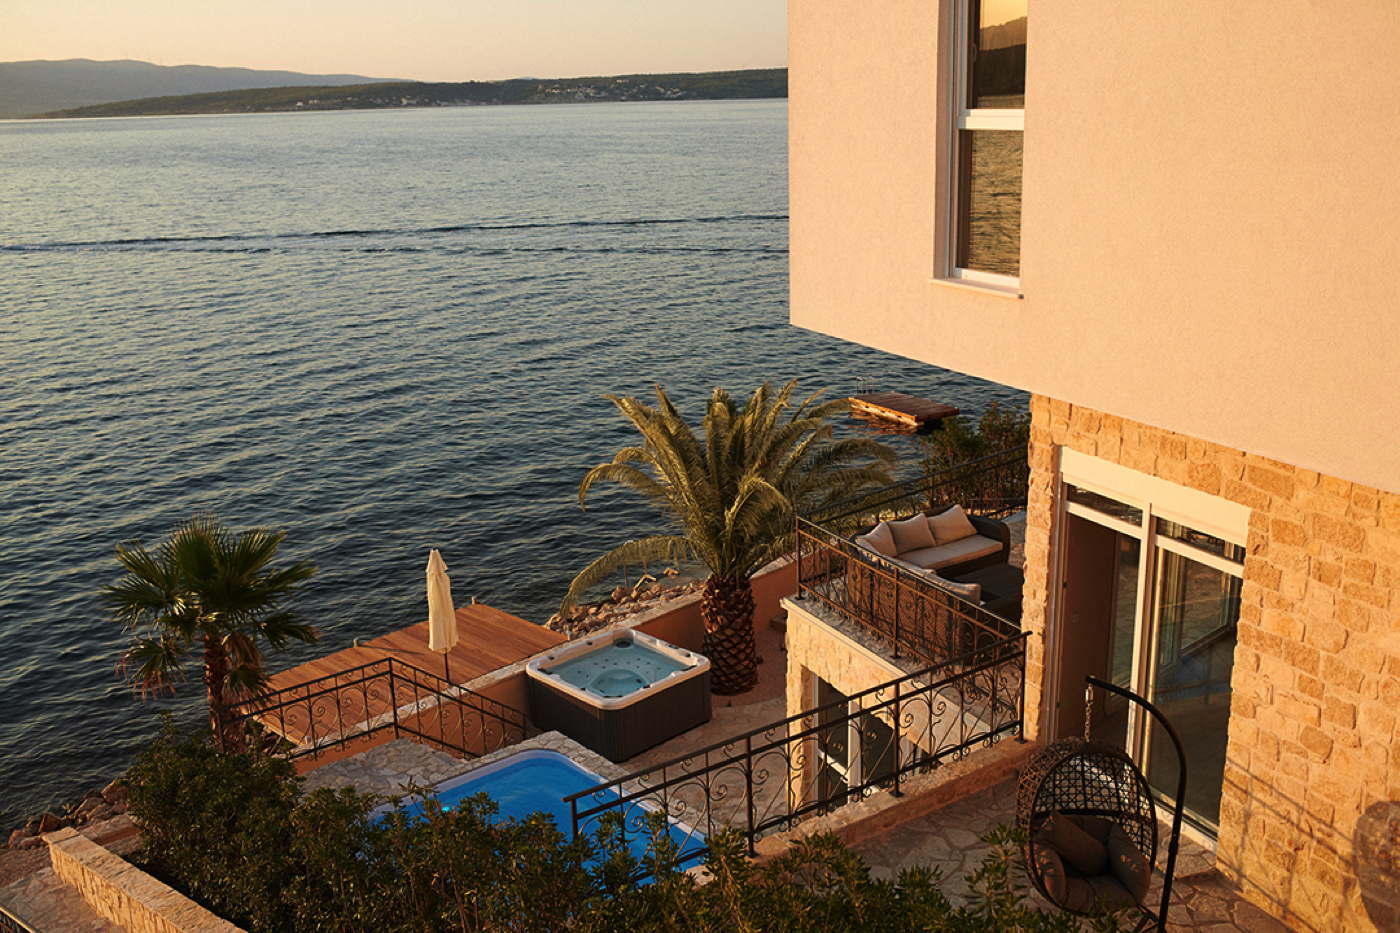 Beachfront luxury holiday villa with pool and service Dalmatia Croatia for rent